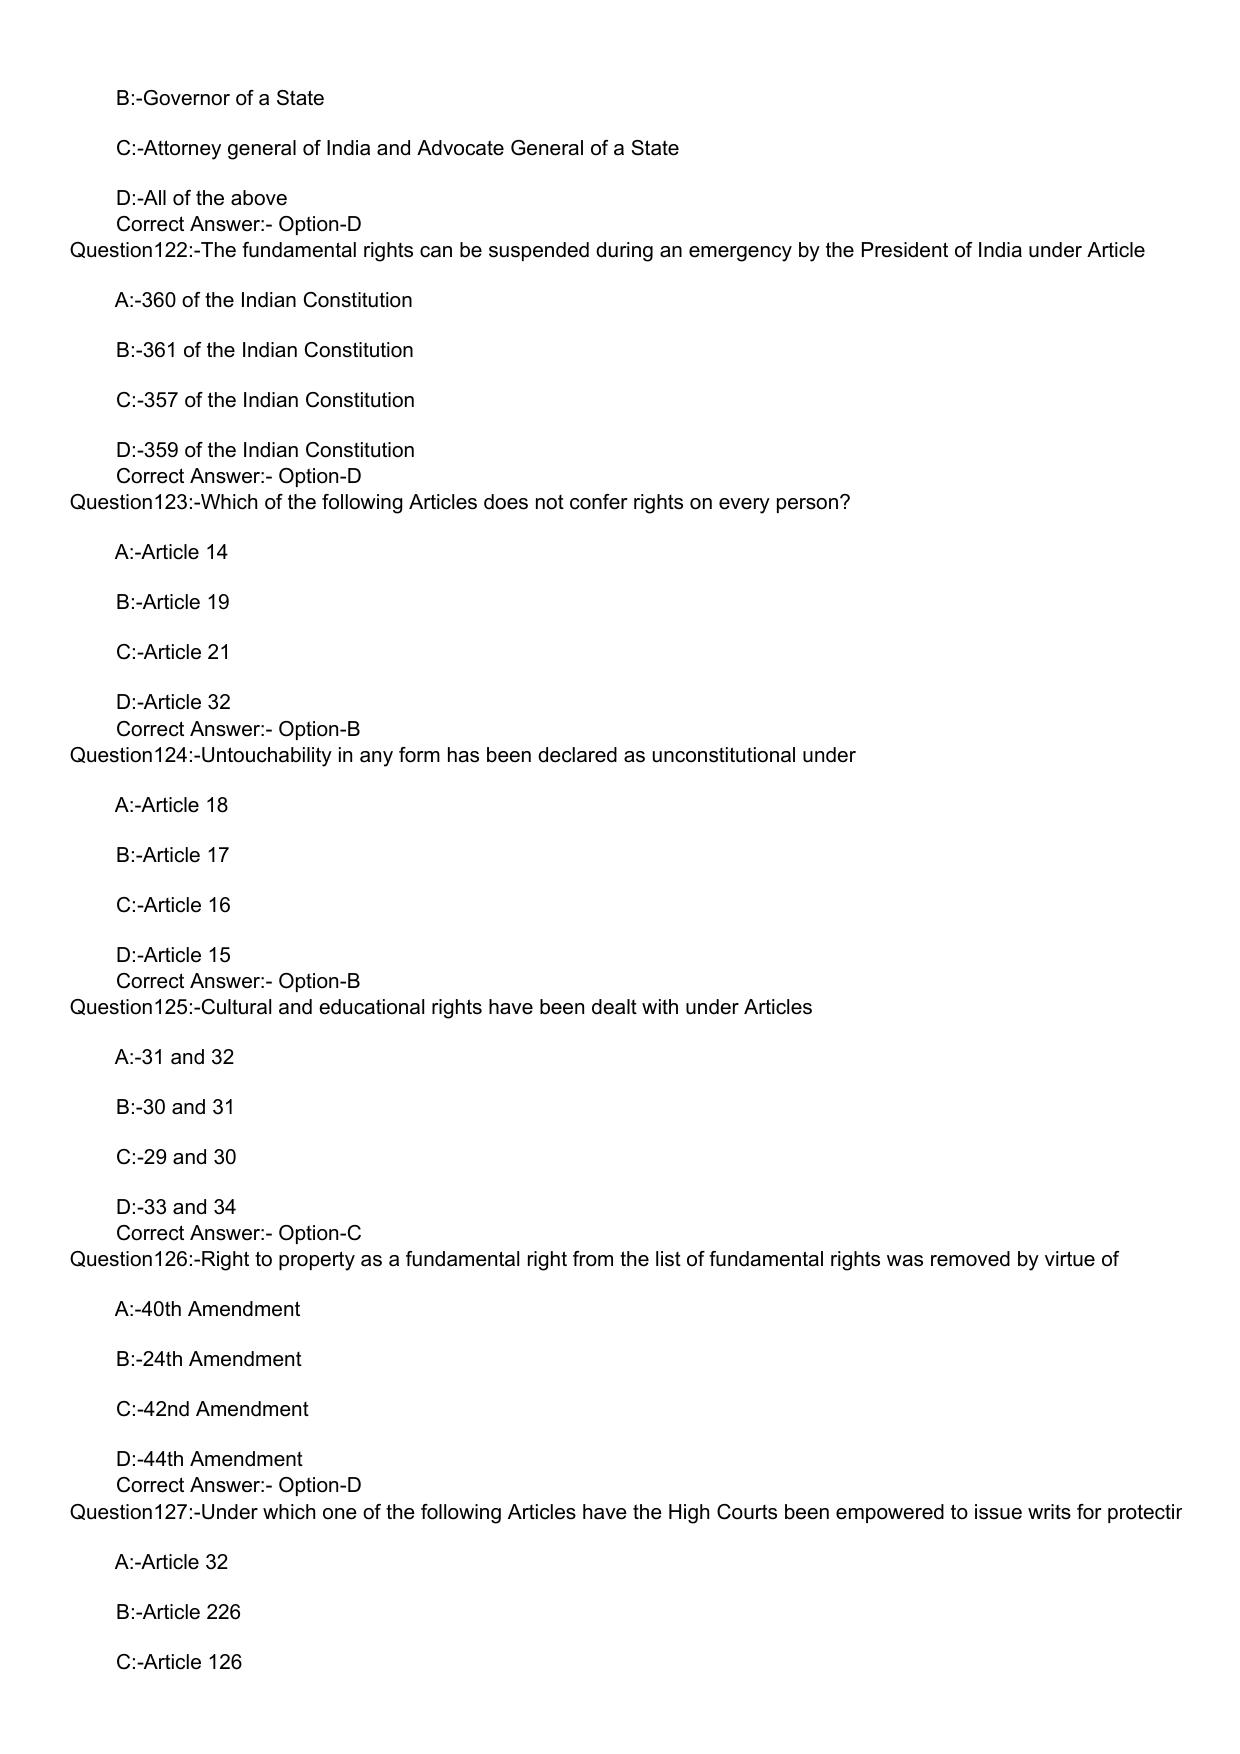 KLEE 5 Year LLB Exam 2020 Question Paper - Page 22